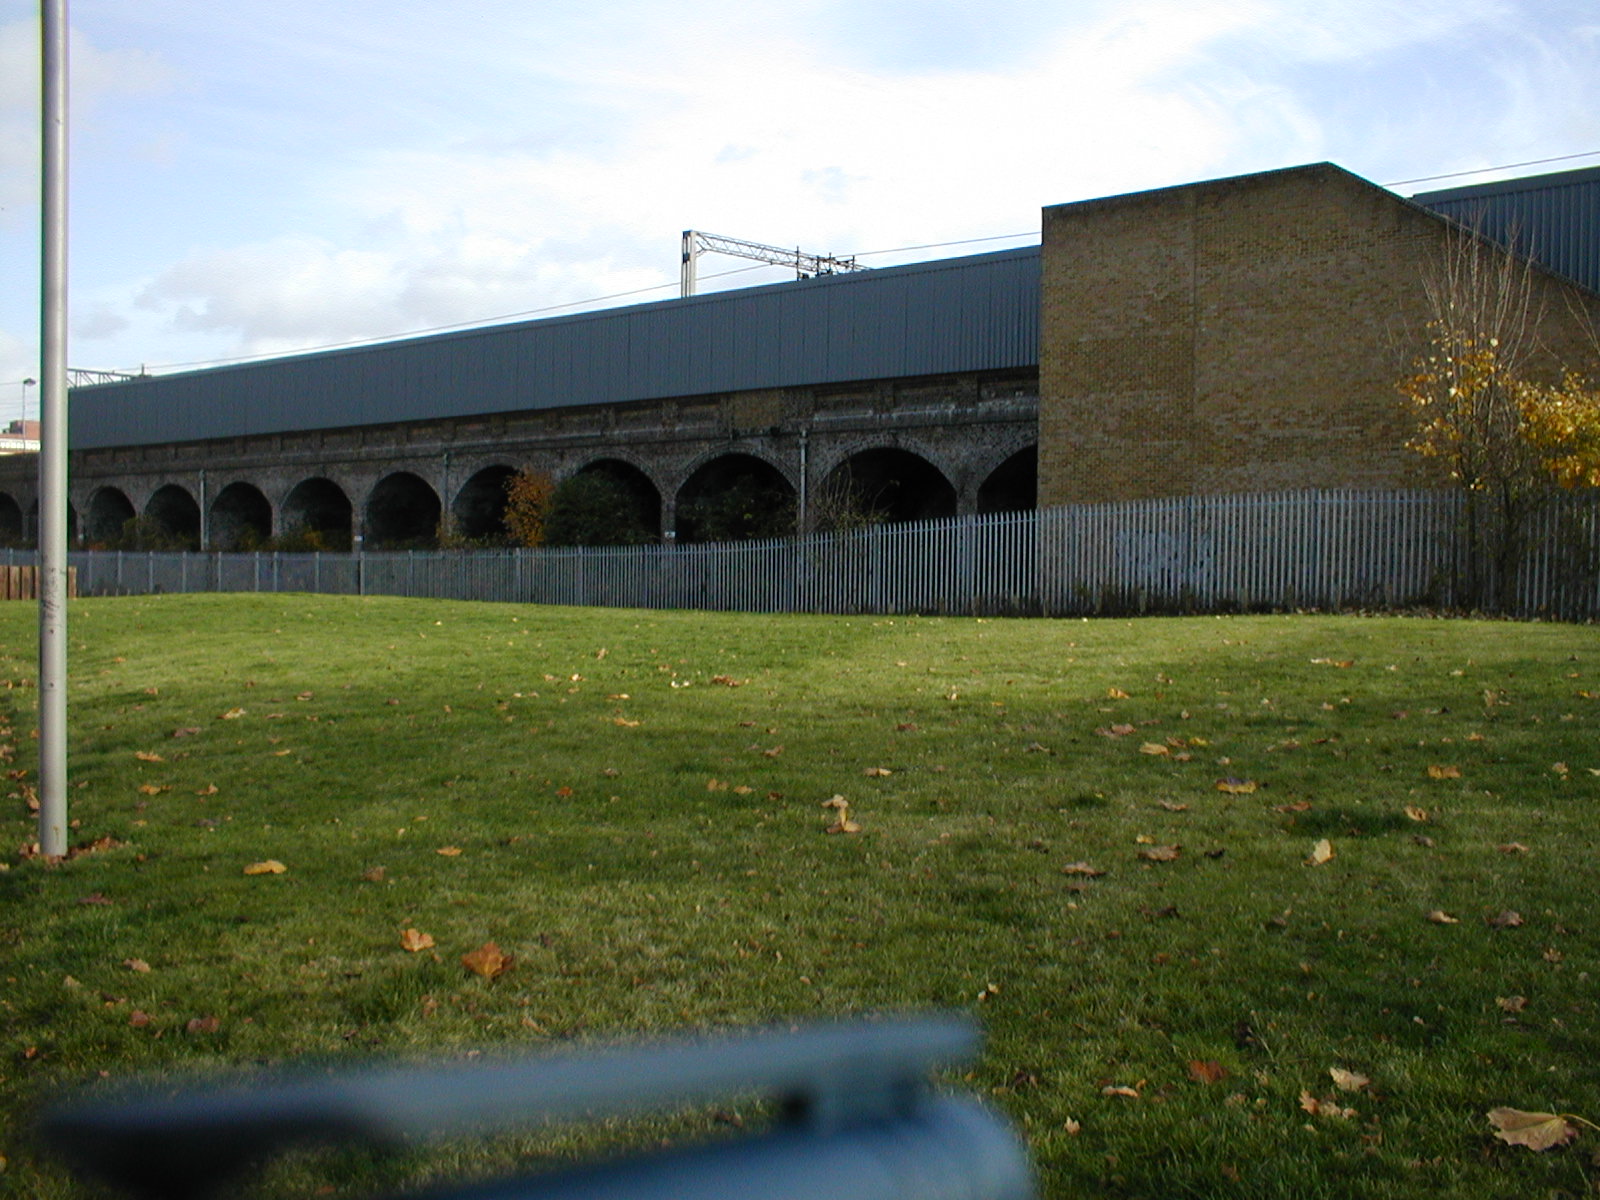 Grassy area now occupied by playground and outdoor gym, November 2003